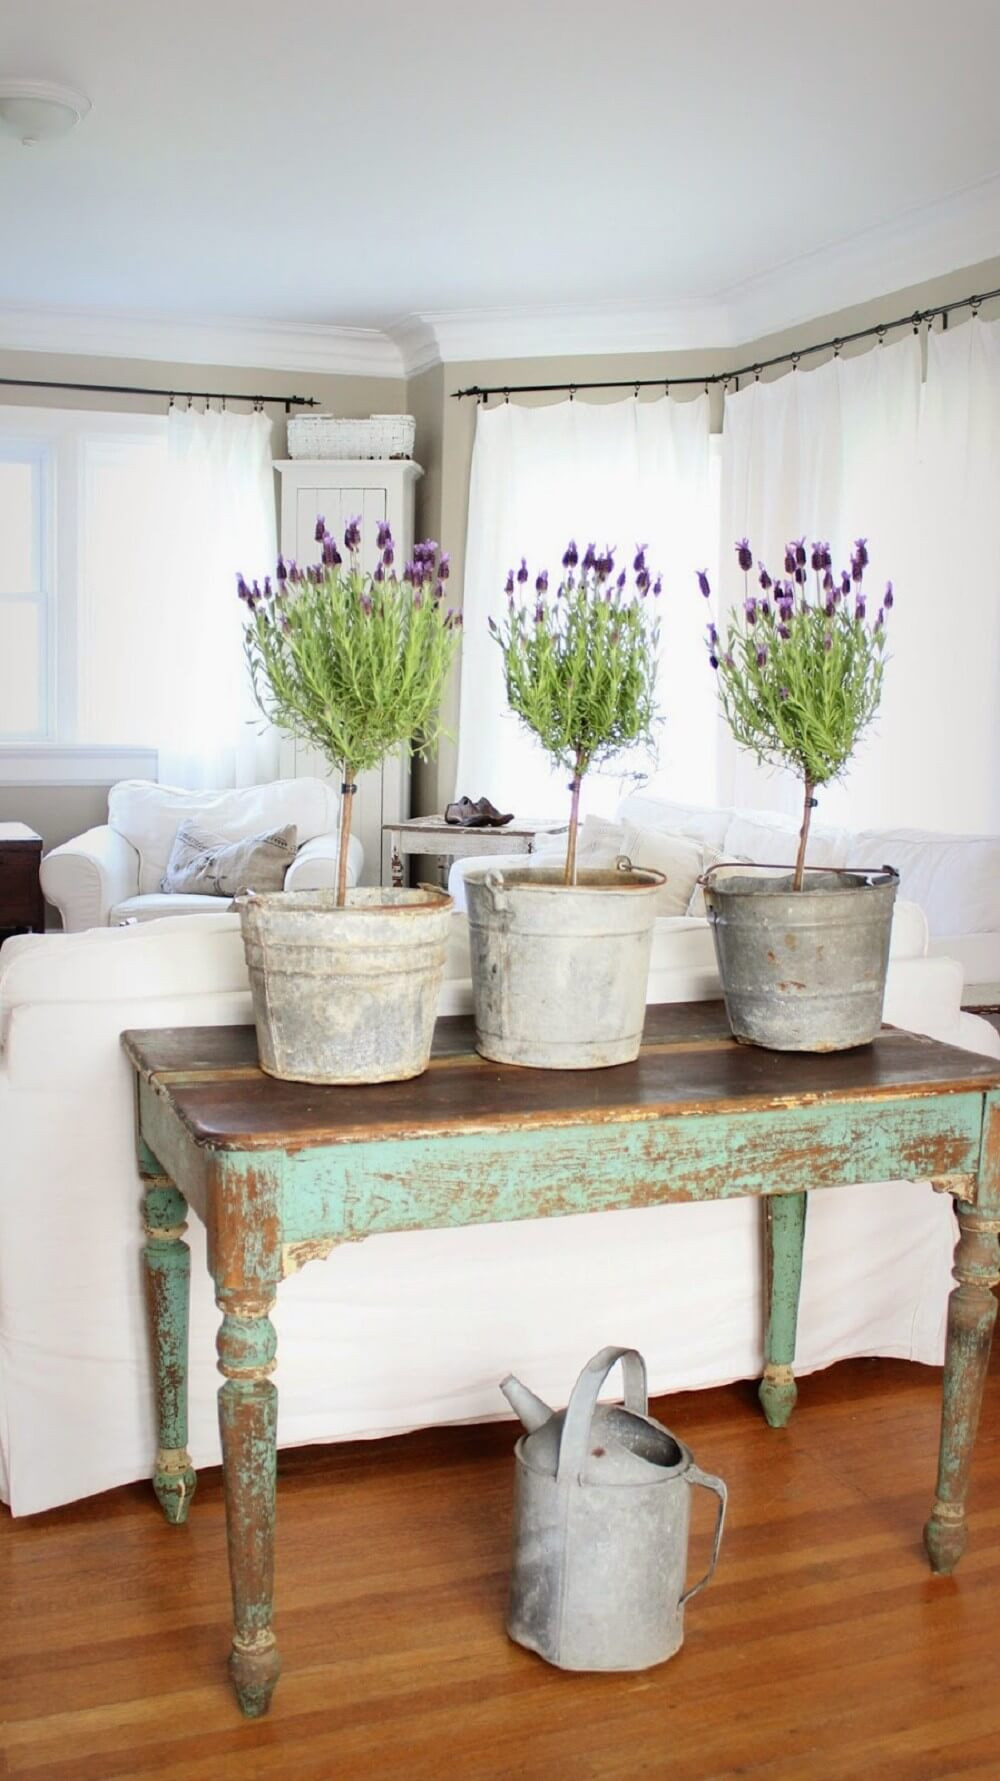 Spring Ideas Decorating
 28 Best Spring Decoration Ideas and Designs for 2019